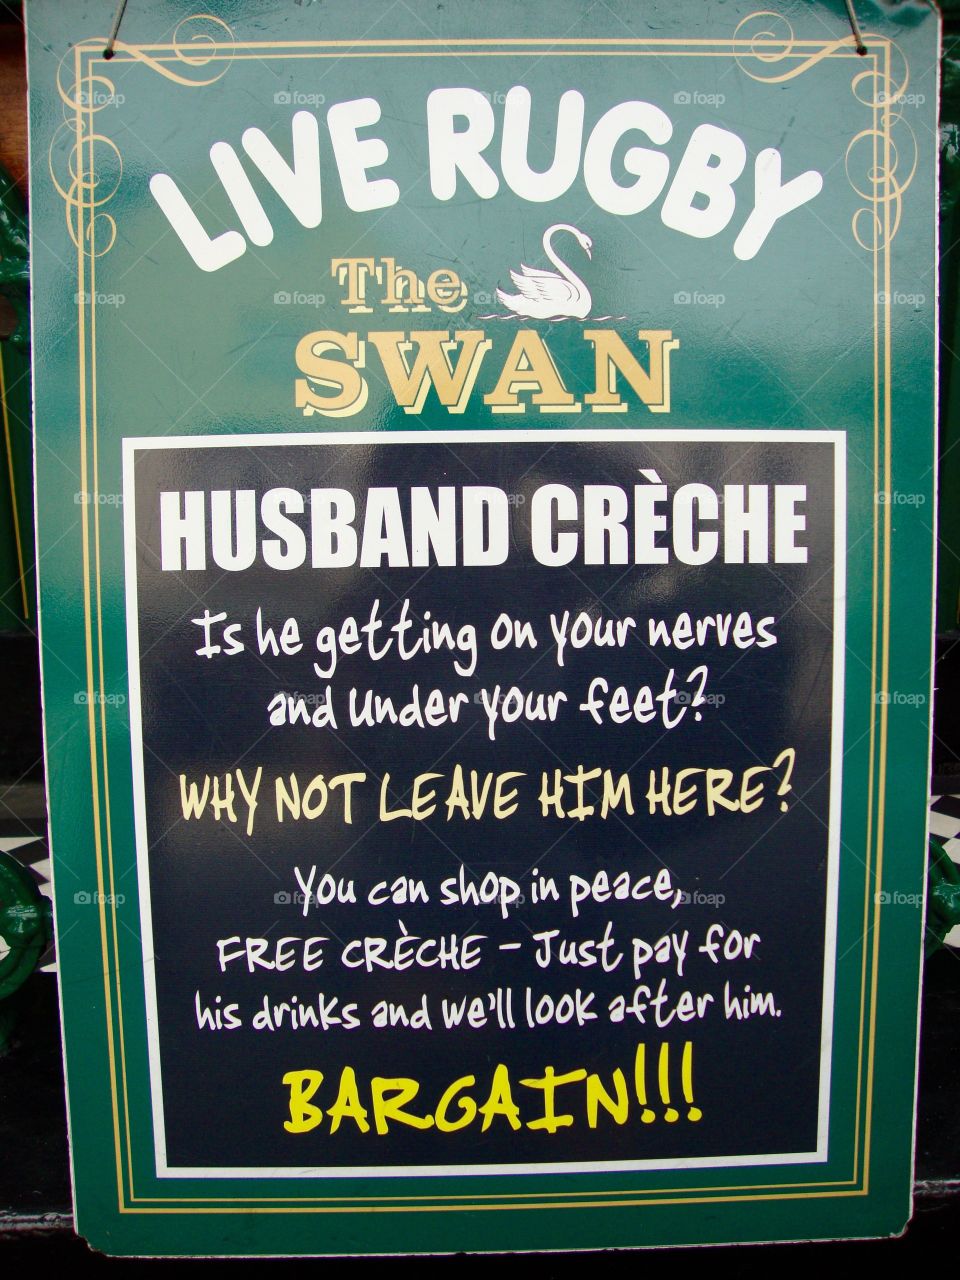 Welcome. Funny pub sign in Guernsey ...